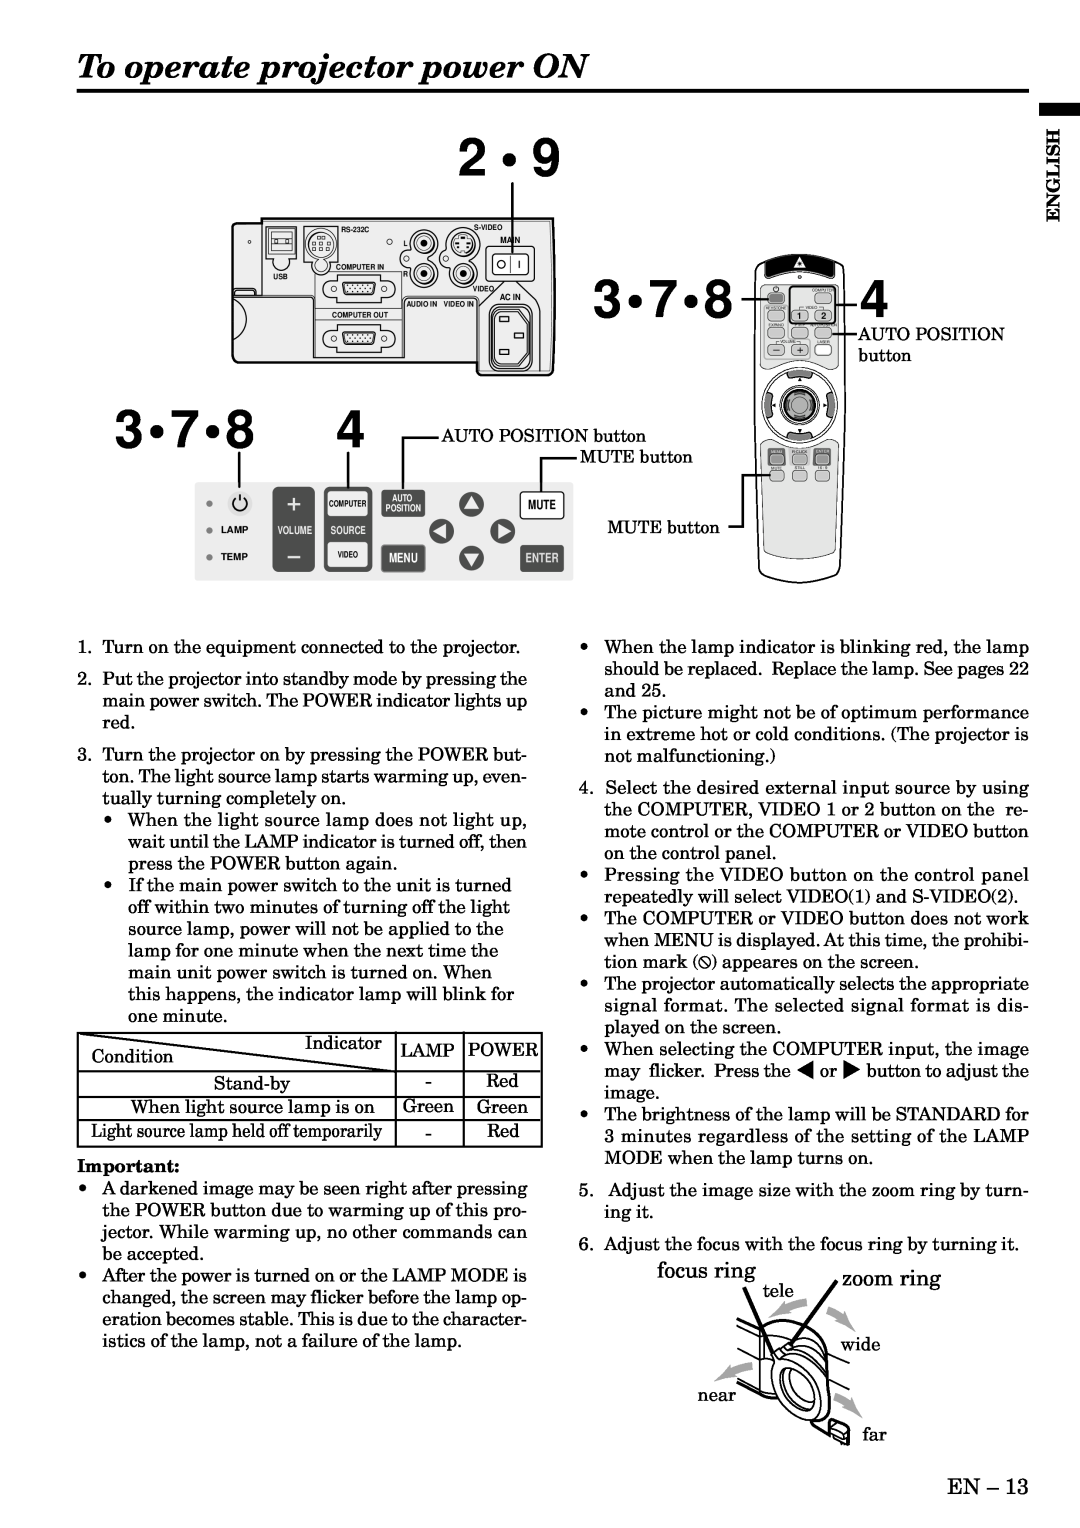 Mitsubishi Electronics XL2U user manual To operate projector power ON, Expand 